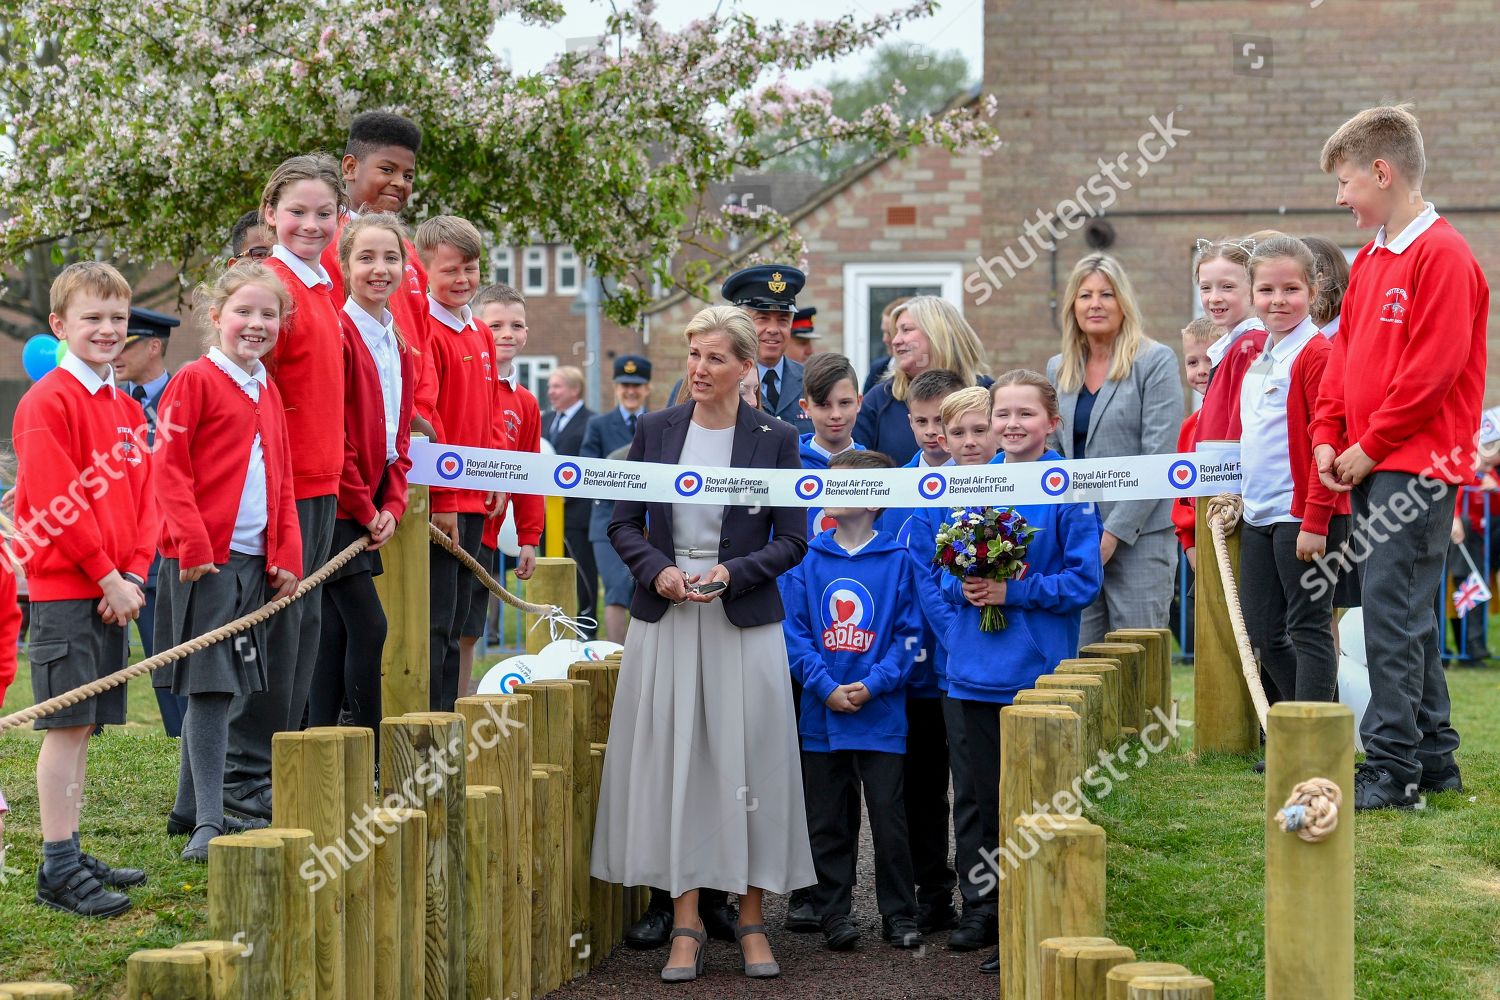 sophie-countess-of-wessex-opens-airplay-play-park-wittering-village-peterborough-uk-shutterstock-editorial-10217568o.jpg